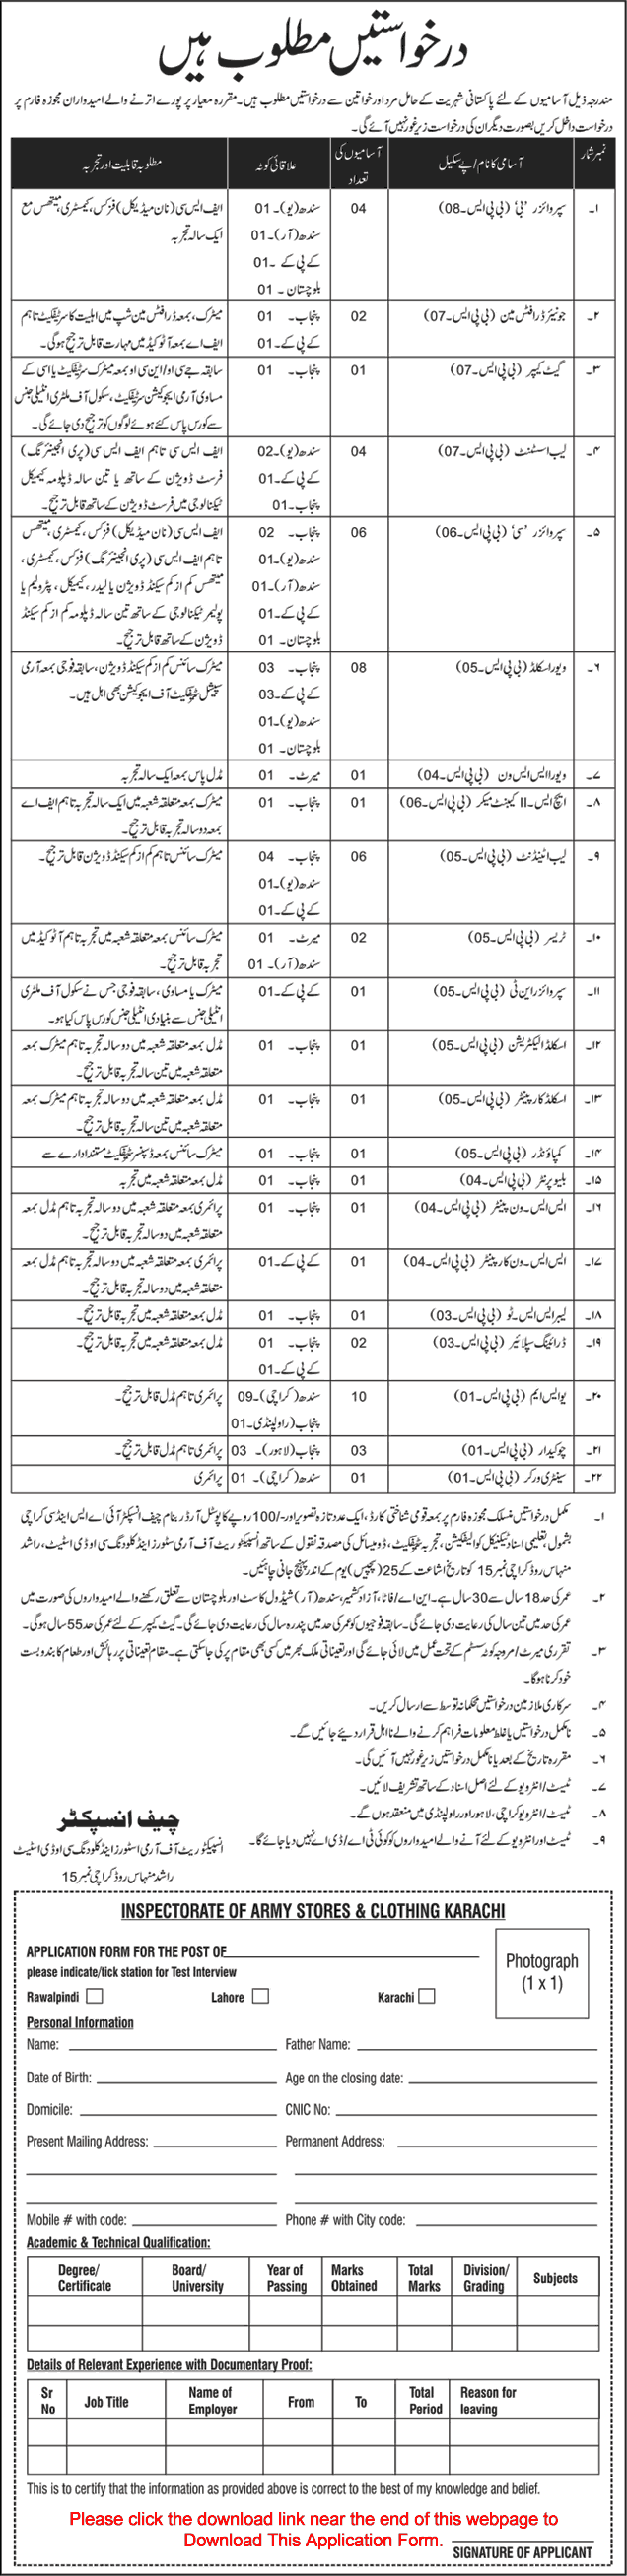 Inspectorate of Army Stores and Clothing Karachi Jobs 2015 February Application Form Download Latest